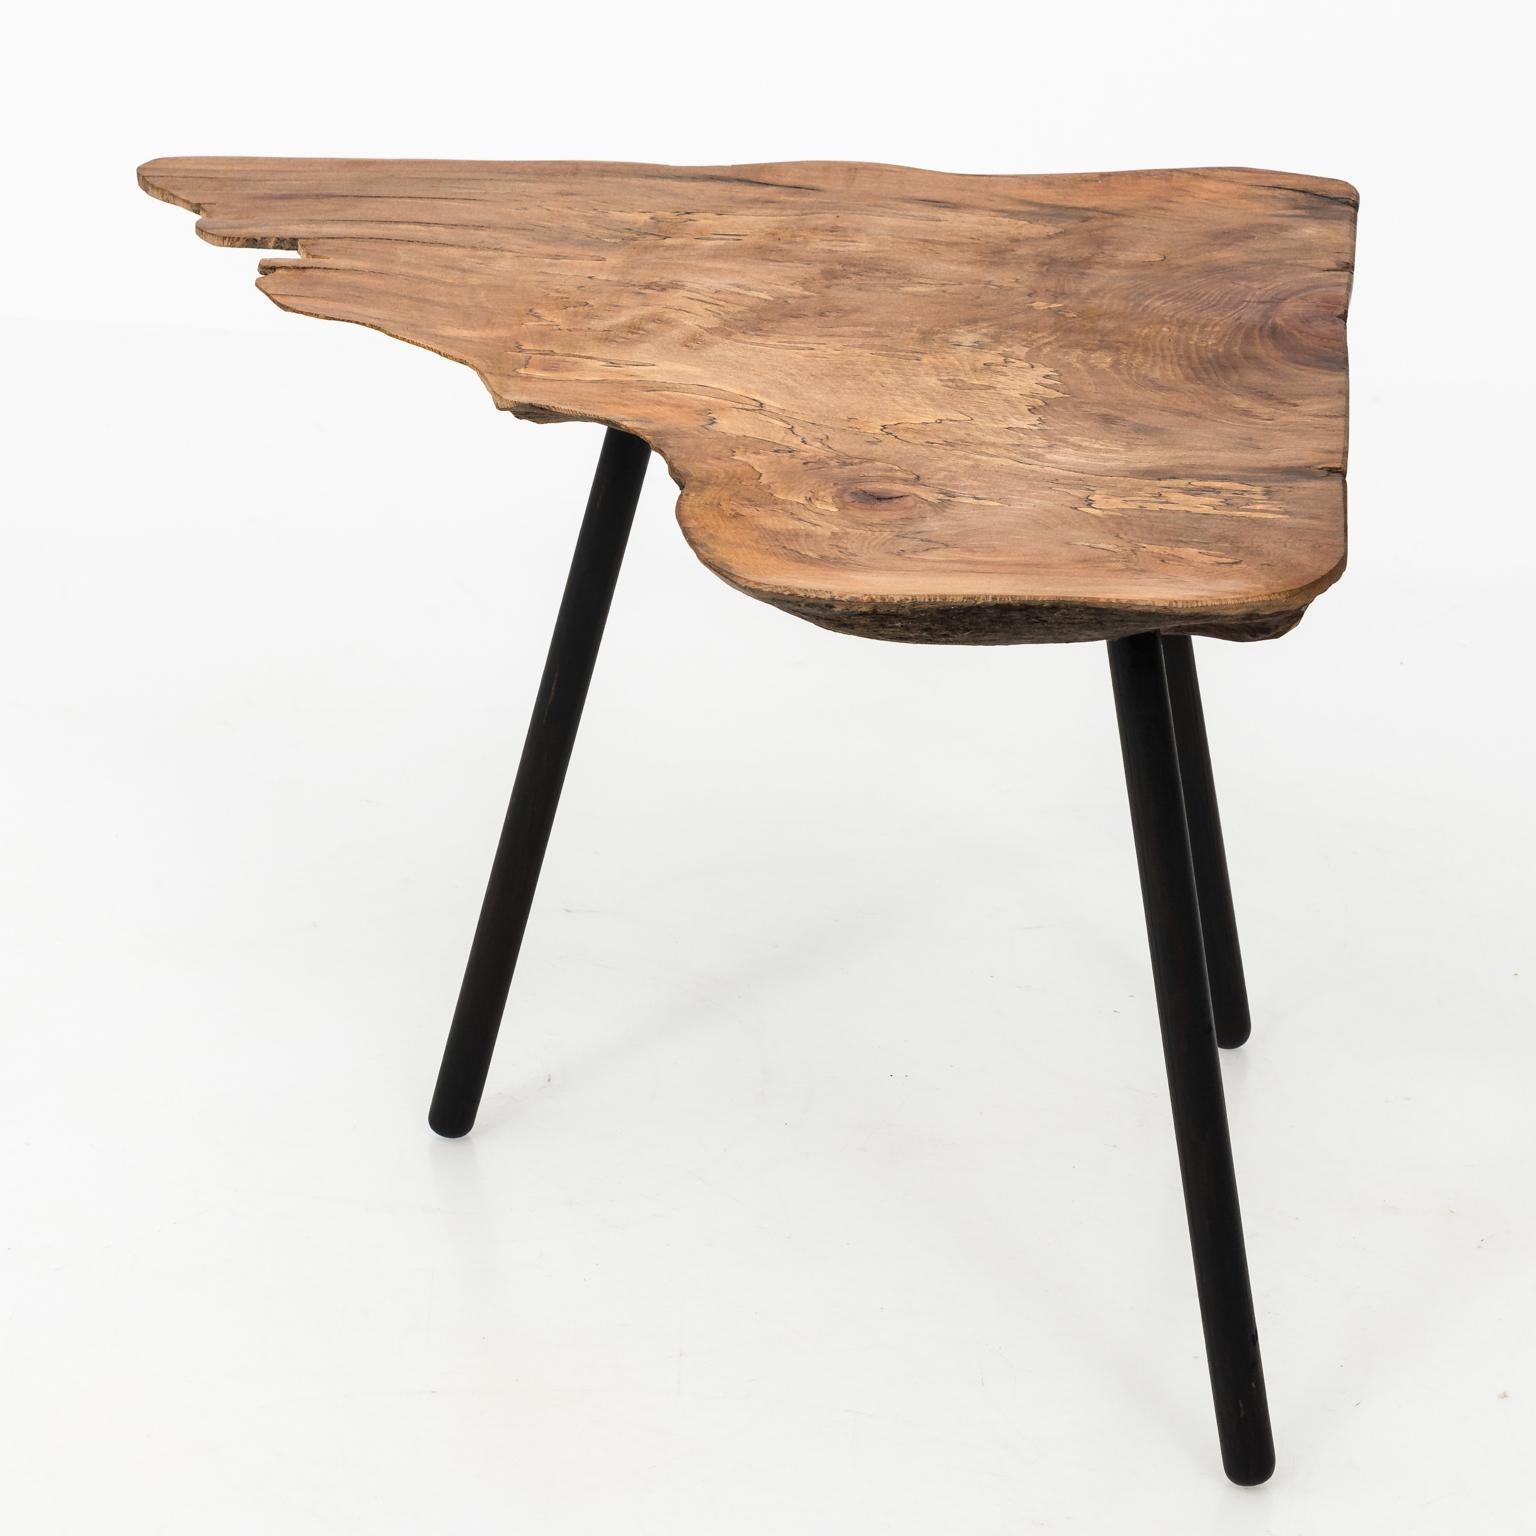 Modern freeform walnut coffee table with three black lacquered legs, circa 2000. Made in the United States.